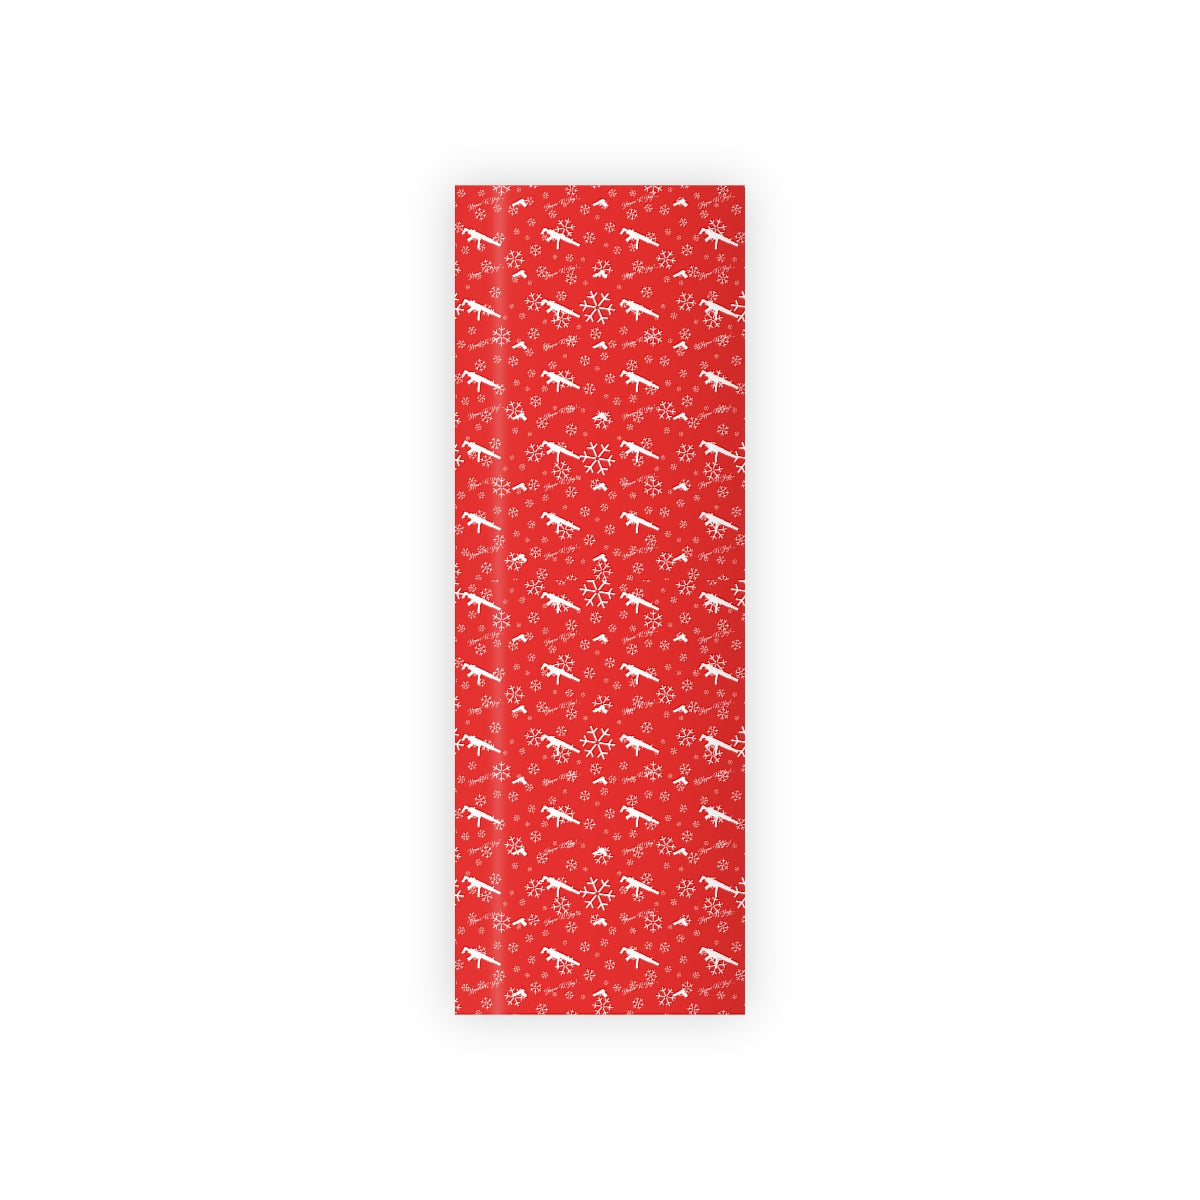 Yippe Ki Yay Gift Wrapping Paper Rolls, 1pc